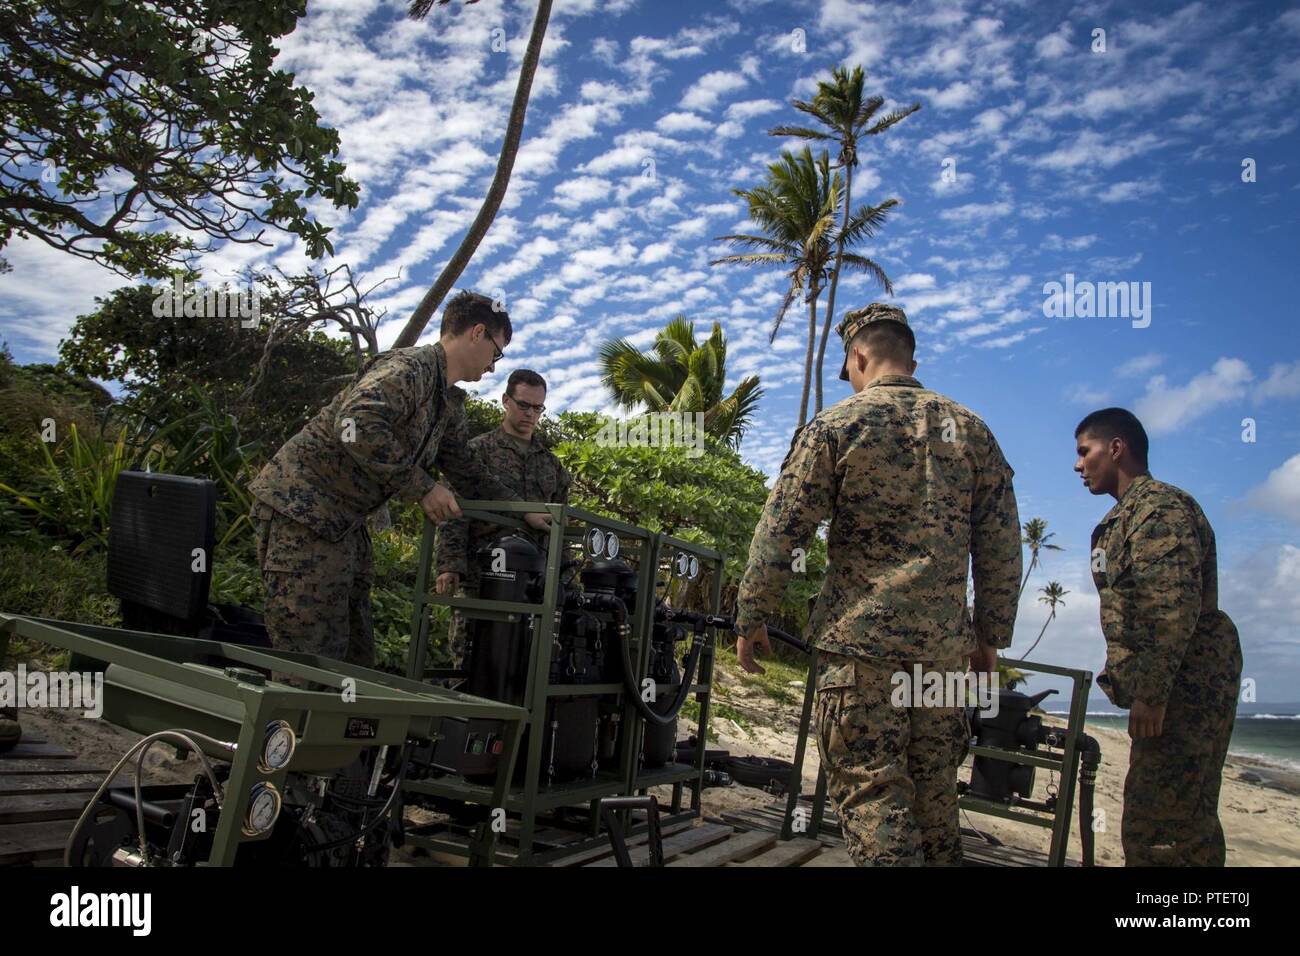 U.S. Marines with Task Force Koa Moana 17 set up a Light Weight Water Purification System on a beach on Tongatapu Island, Tonga during Exercise TAFAKULA July 17, 2017. Exercise TAFAKULA is designed to strengthen the military-to-military relations, infantry and combat training between Tonga’s His Majesty’s Armed Forces, French Army of New Caledonia, New Zealand Defense Force, and the United States Armed Forces. Stock Photo